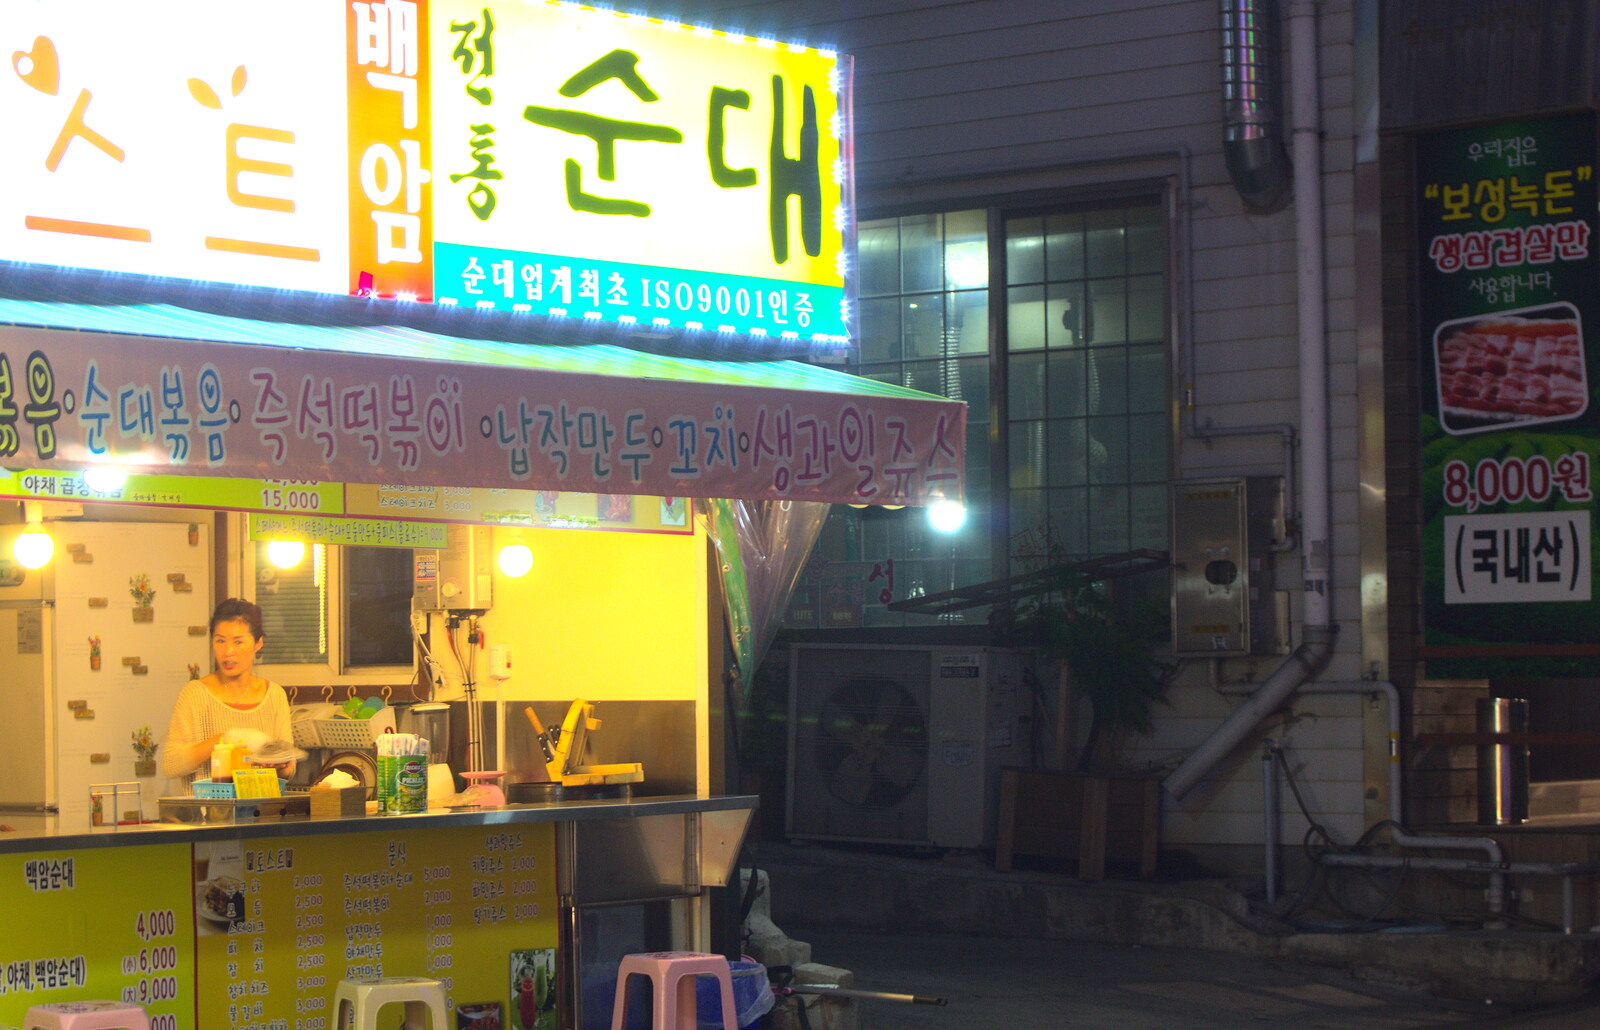 Another pop-up snack van by night from Working at Samsung, and Geumosan Mountain, Gumi, Gyeongsangbuk-do, Korea - 24th June 2012